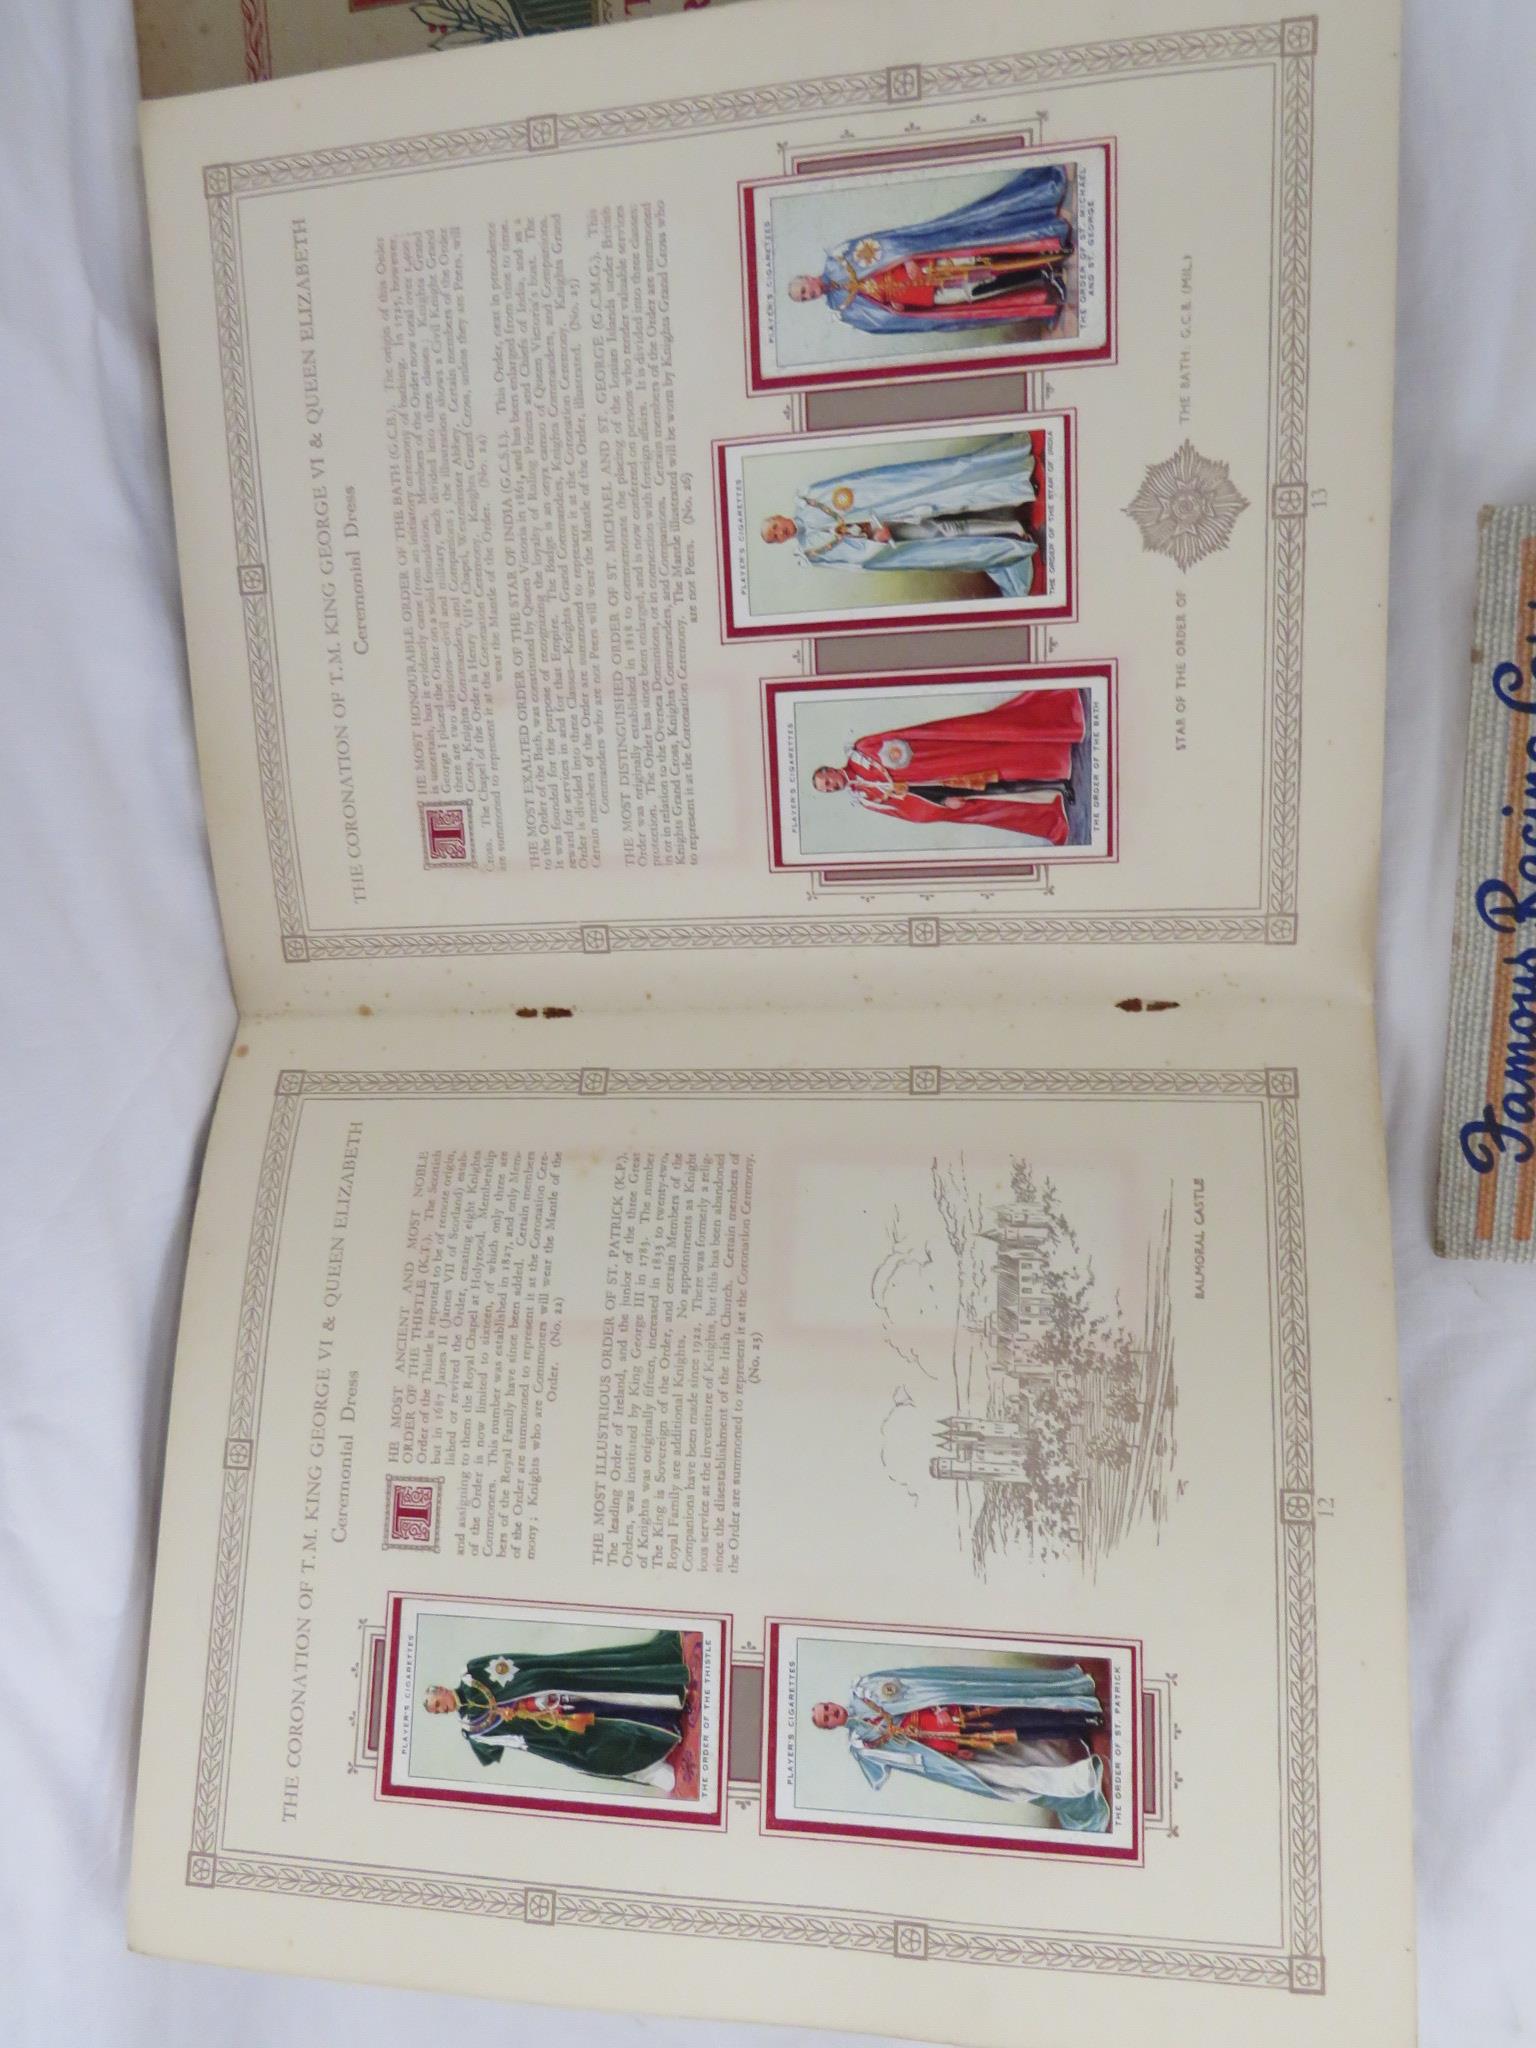 JOHN PLAYER CIGARETTE CARD ALBUMS - MILITARY UNIFORMS AND 1937 CORONATION, AND A PACK OF CELESQUE - Image 2 of 2